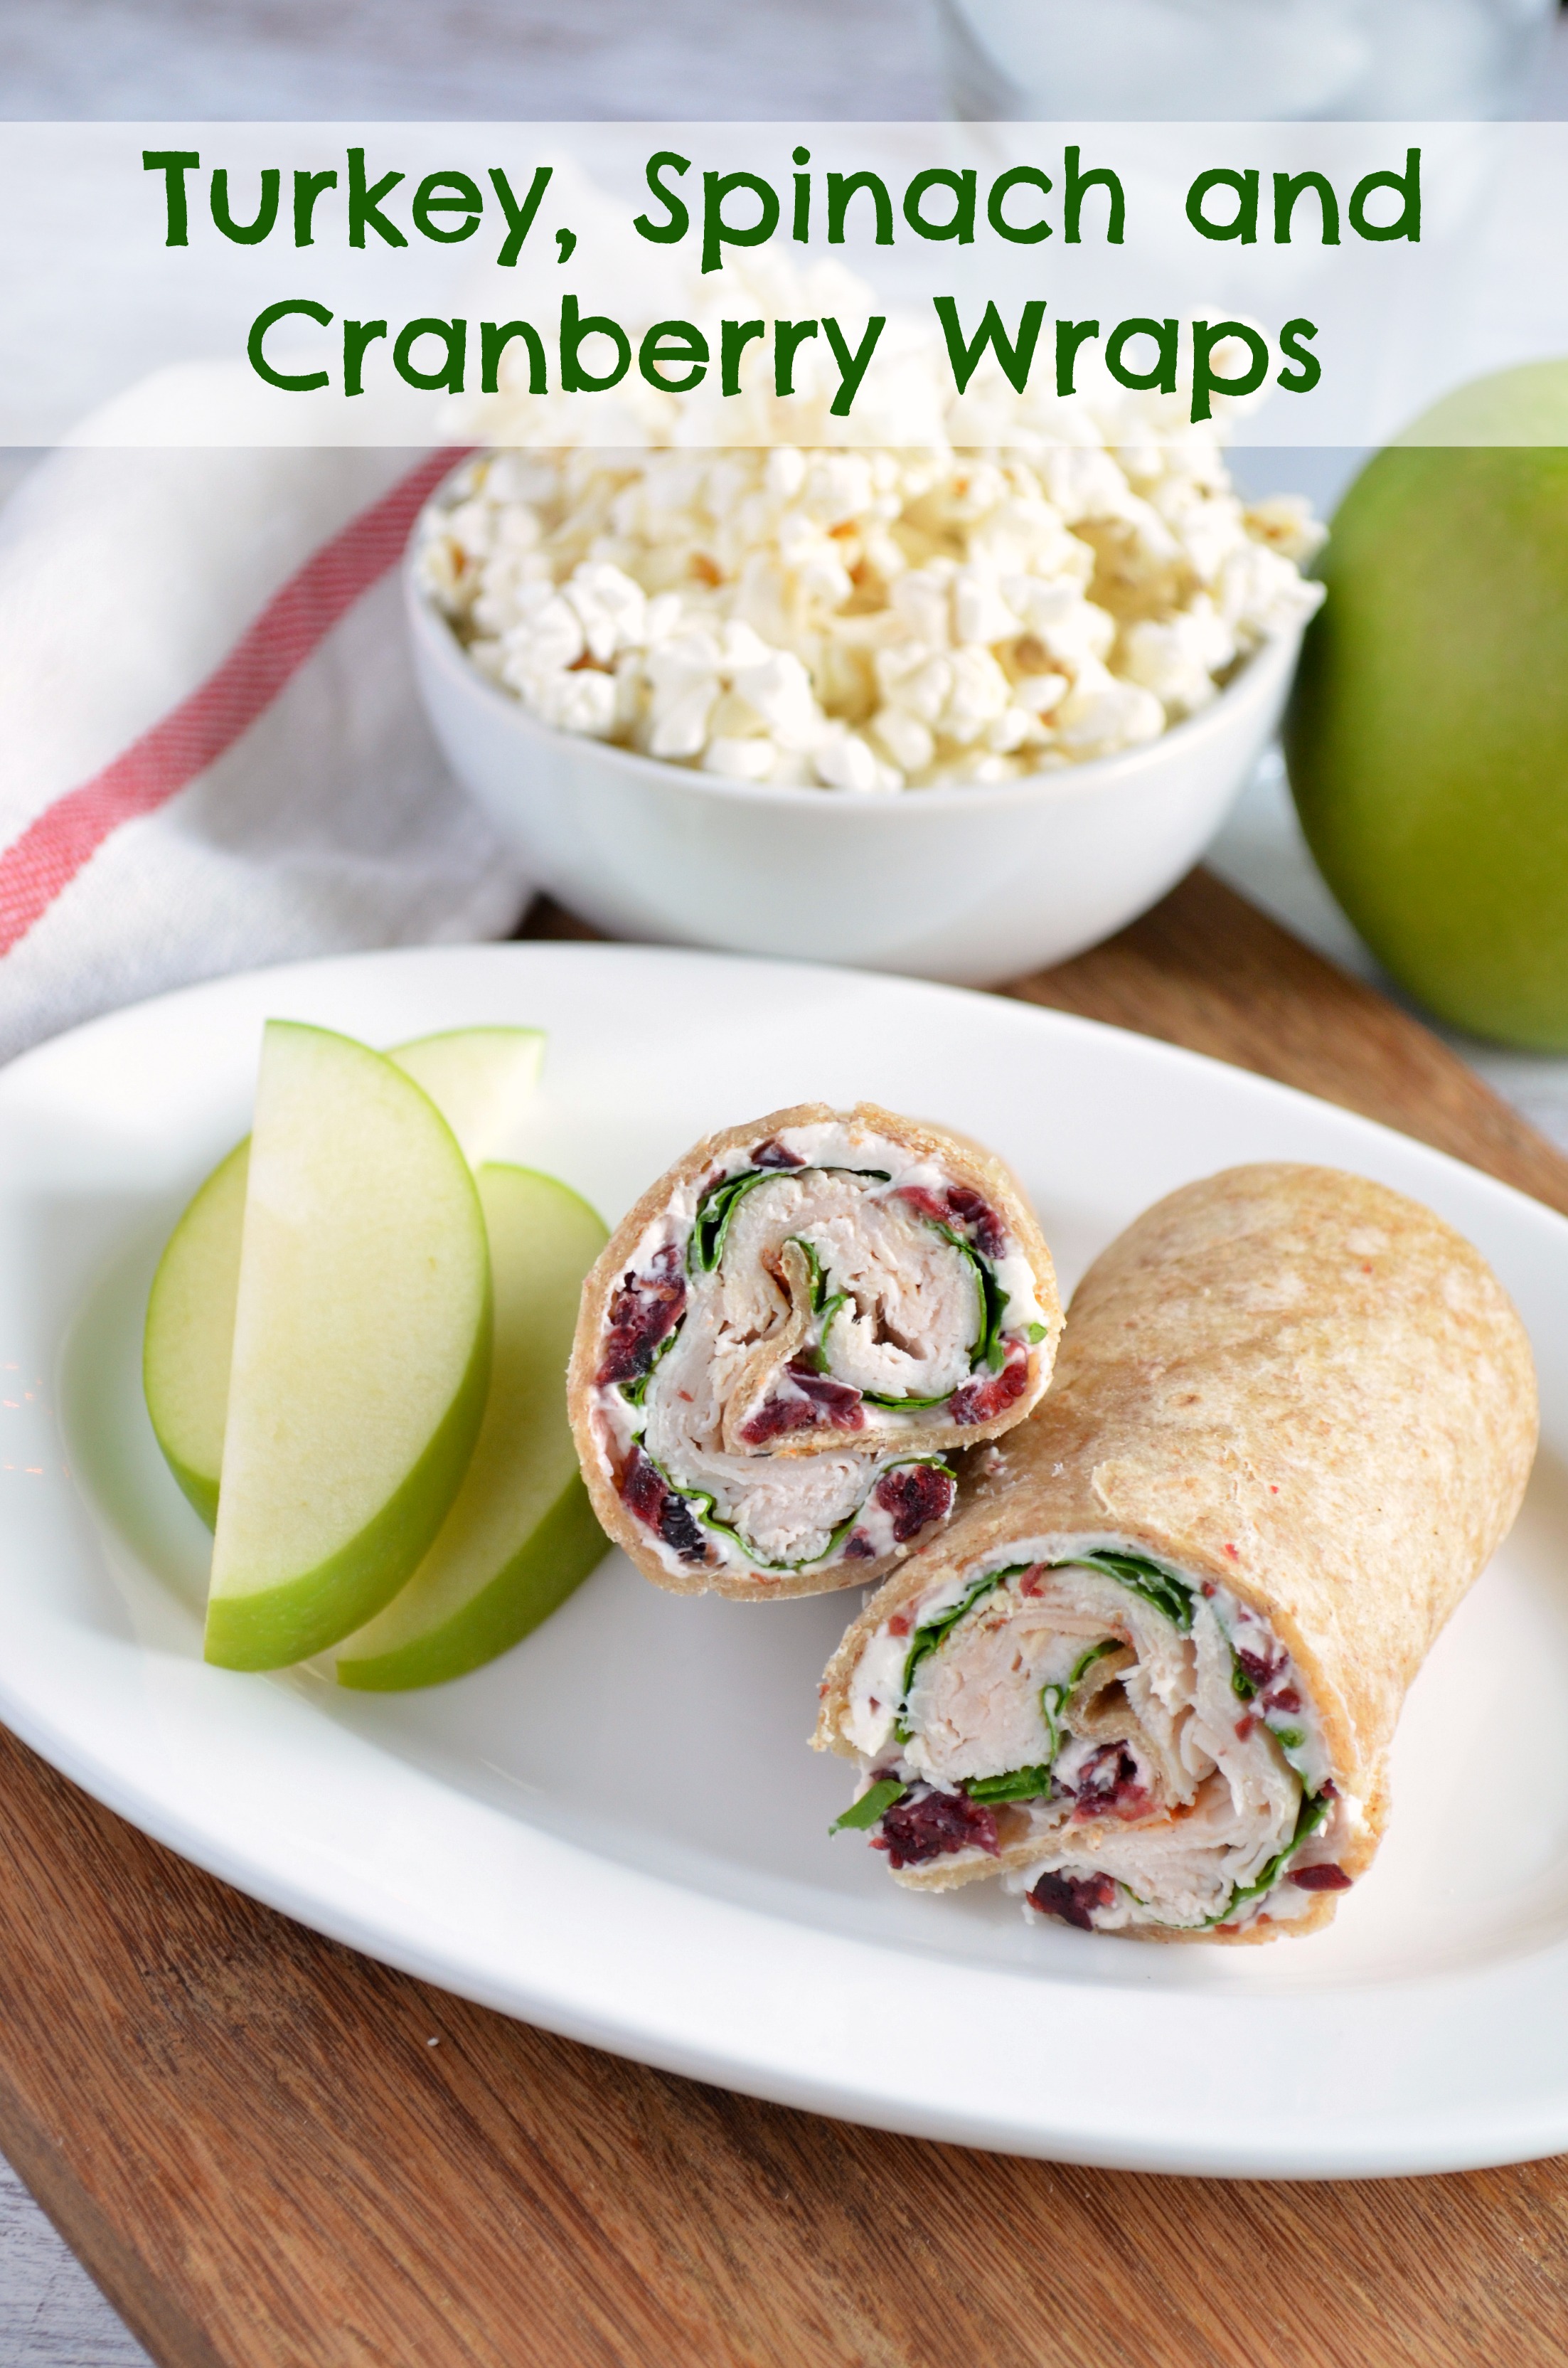 Turkey, Spinach, and Cranberry Wraps